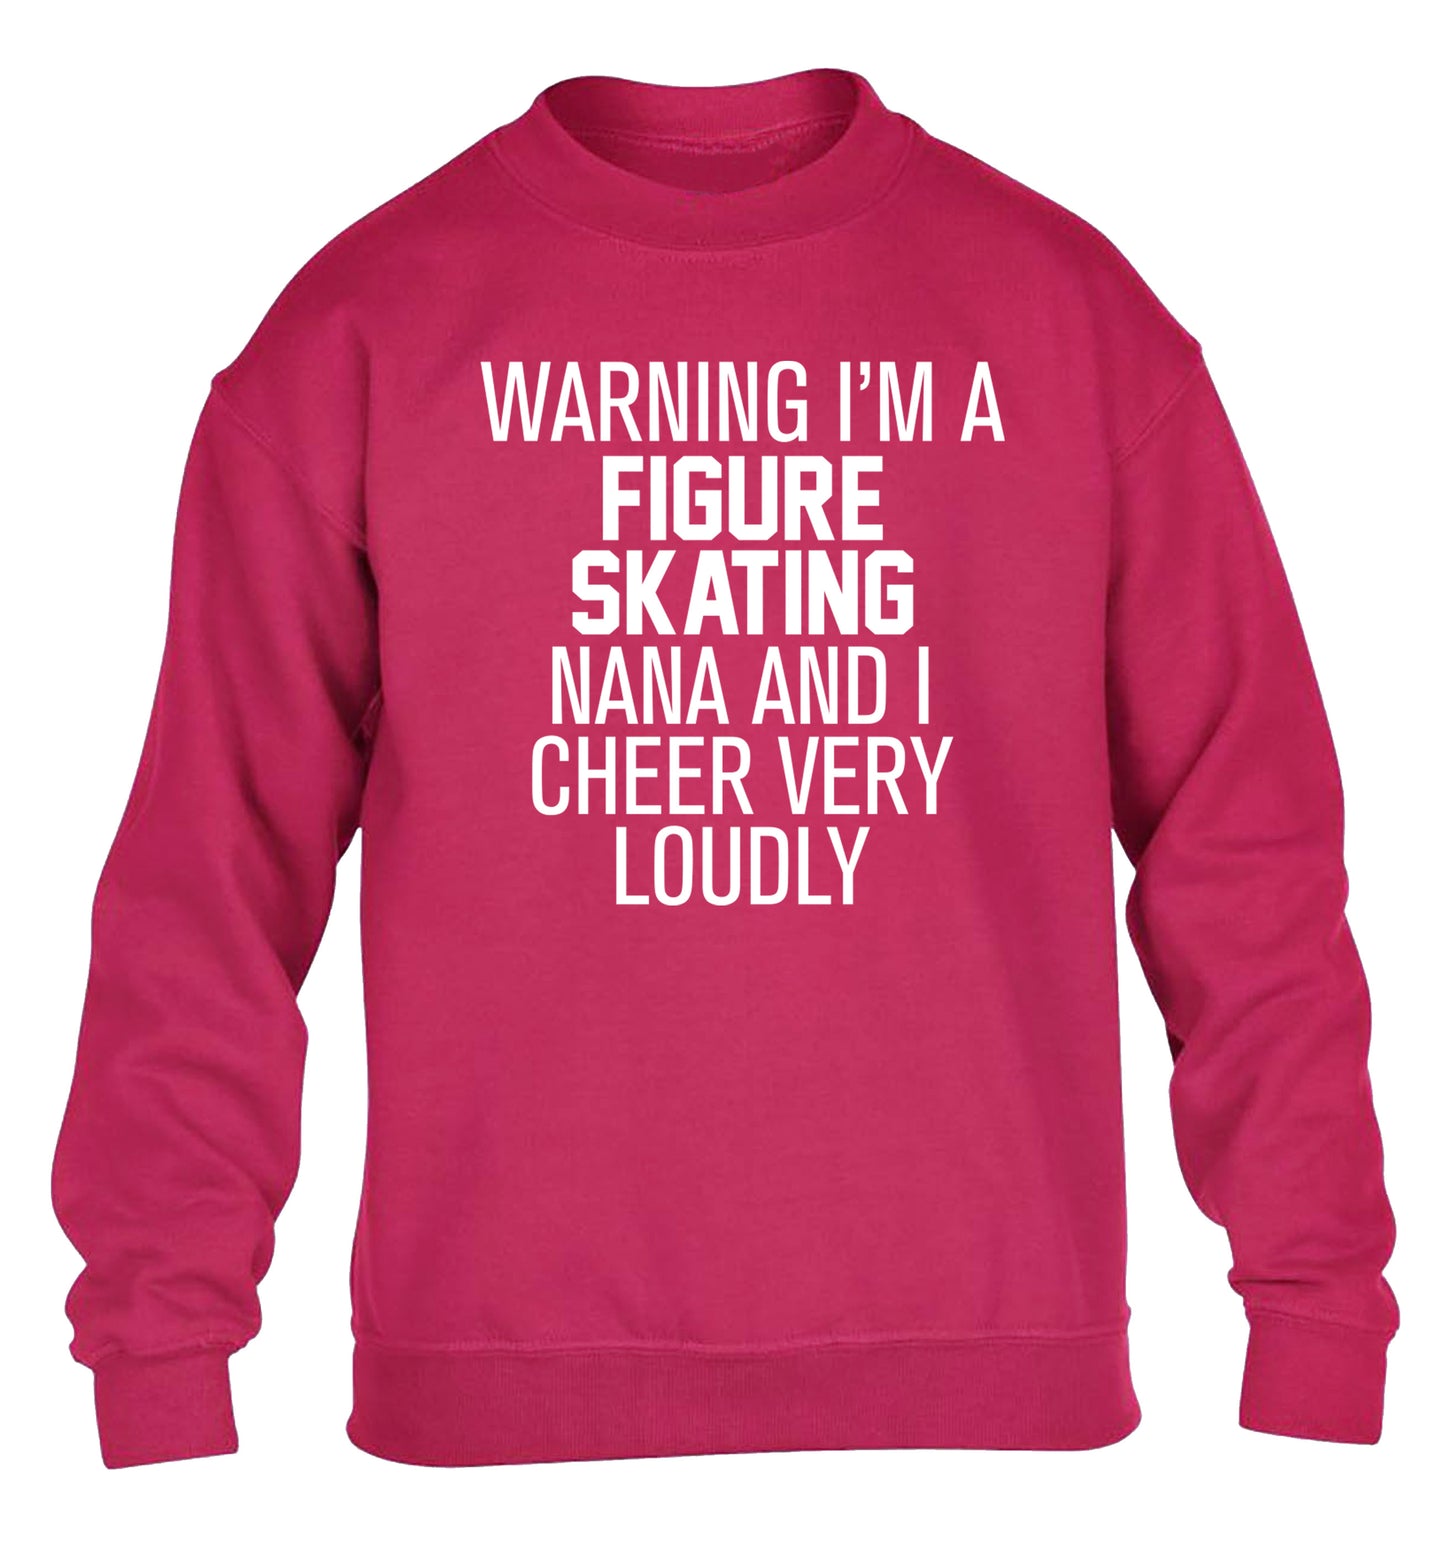 Warning I'm a figure skating nana and I cheer very loudly children's pink sweater 12-14 Years